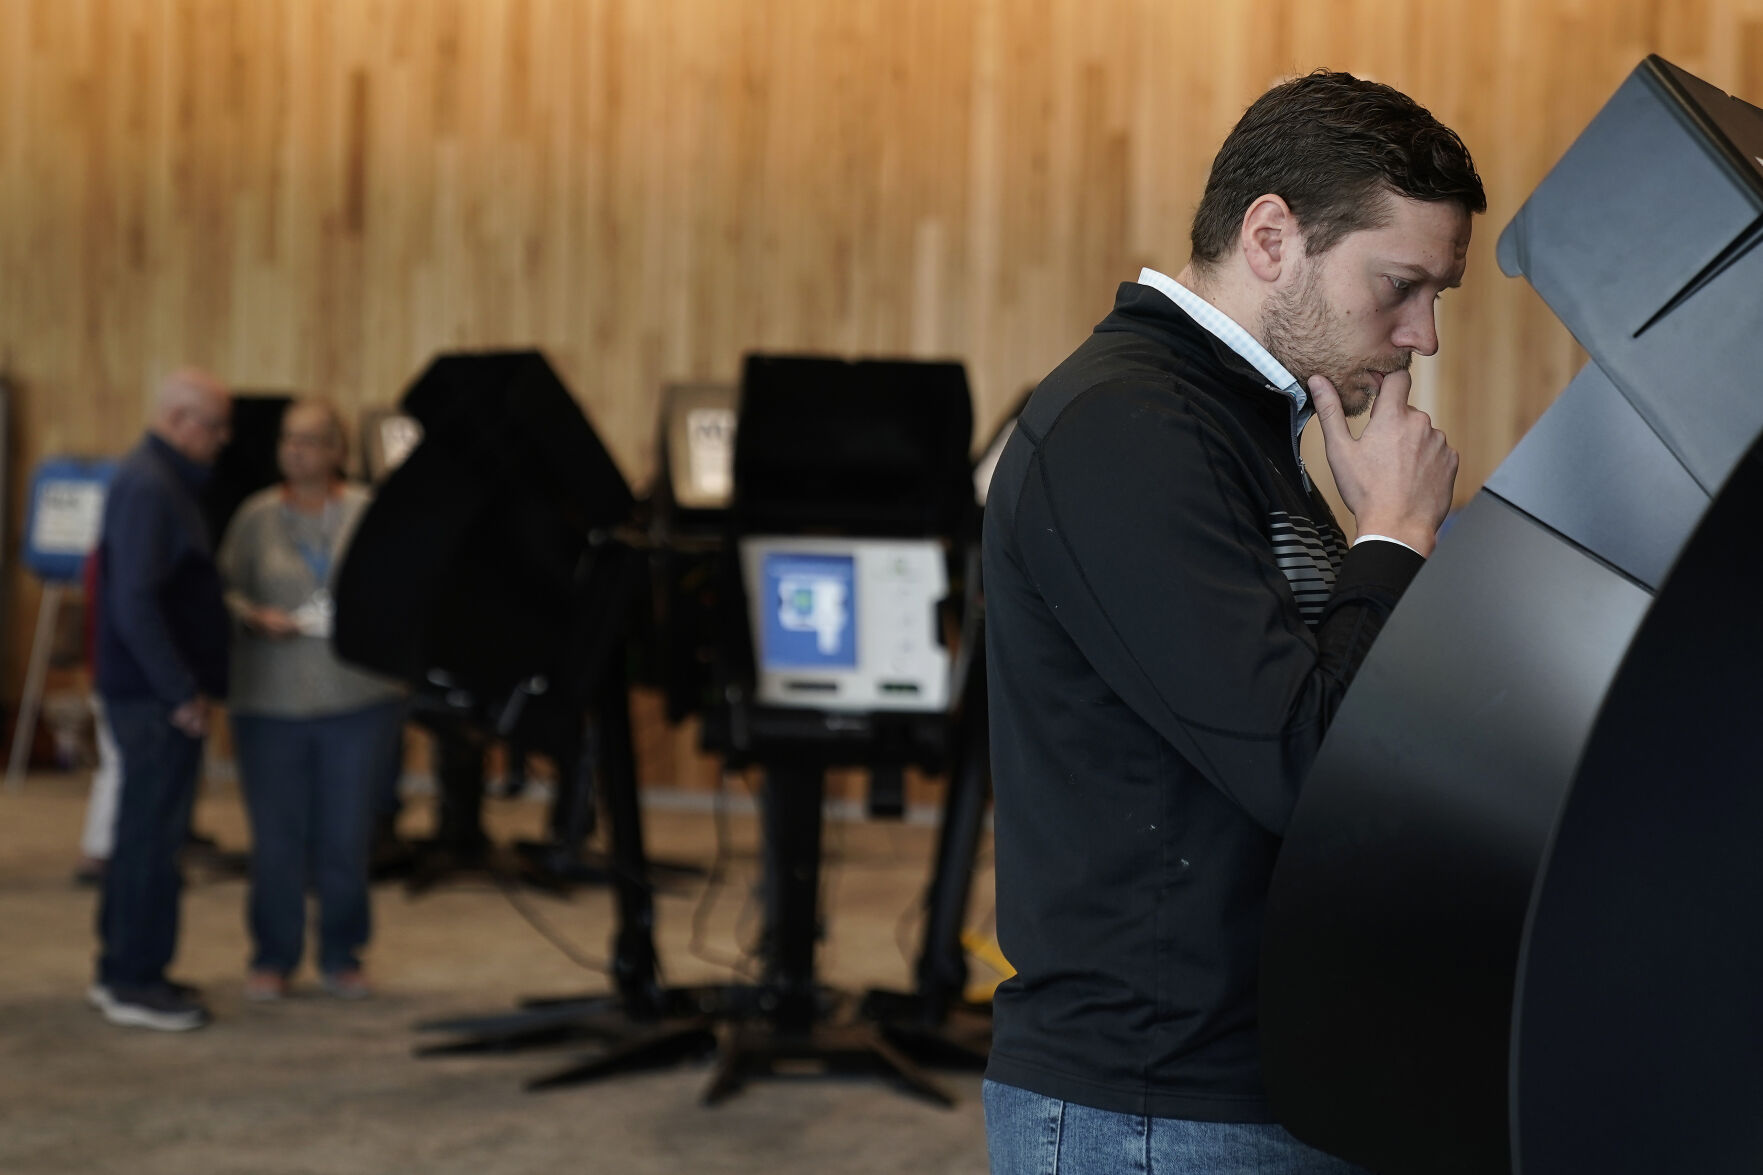 <p>Tony Bergida looks over an electronic ballot while voting early at a polling place, Thursday, Oct. 27, 2022, in Olathe, Kan. Bergida, a 27-year-old father of two and the chair of the Kansas Young Republicans, said the top issue on his mind as he cast his ballot was the economy. (AP Photo/Charlie Riedel)</p>   PHOTO CREDIT: Charlie Riedel 